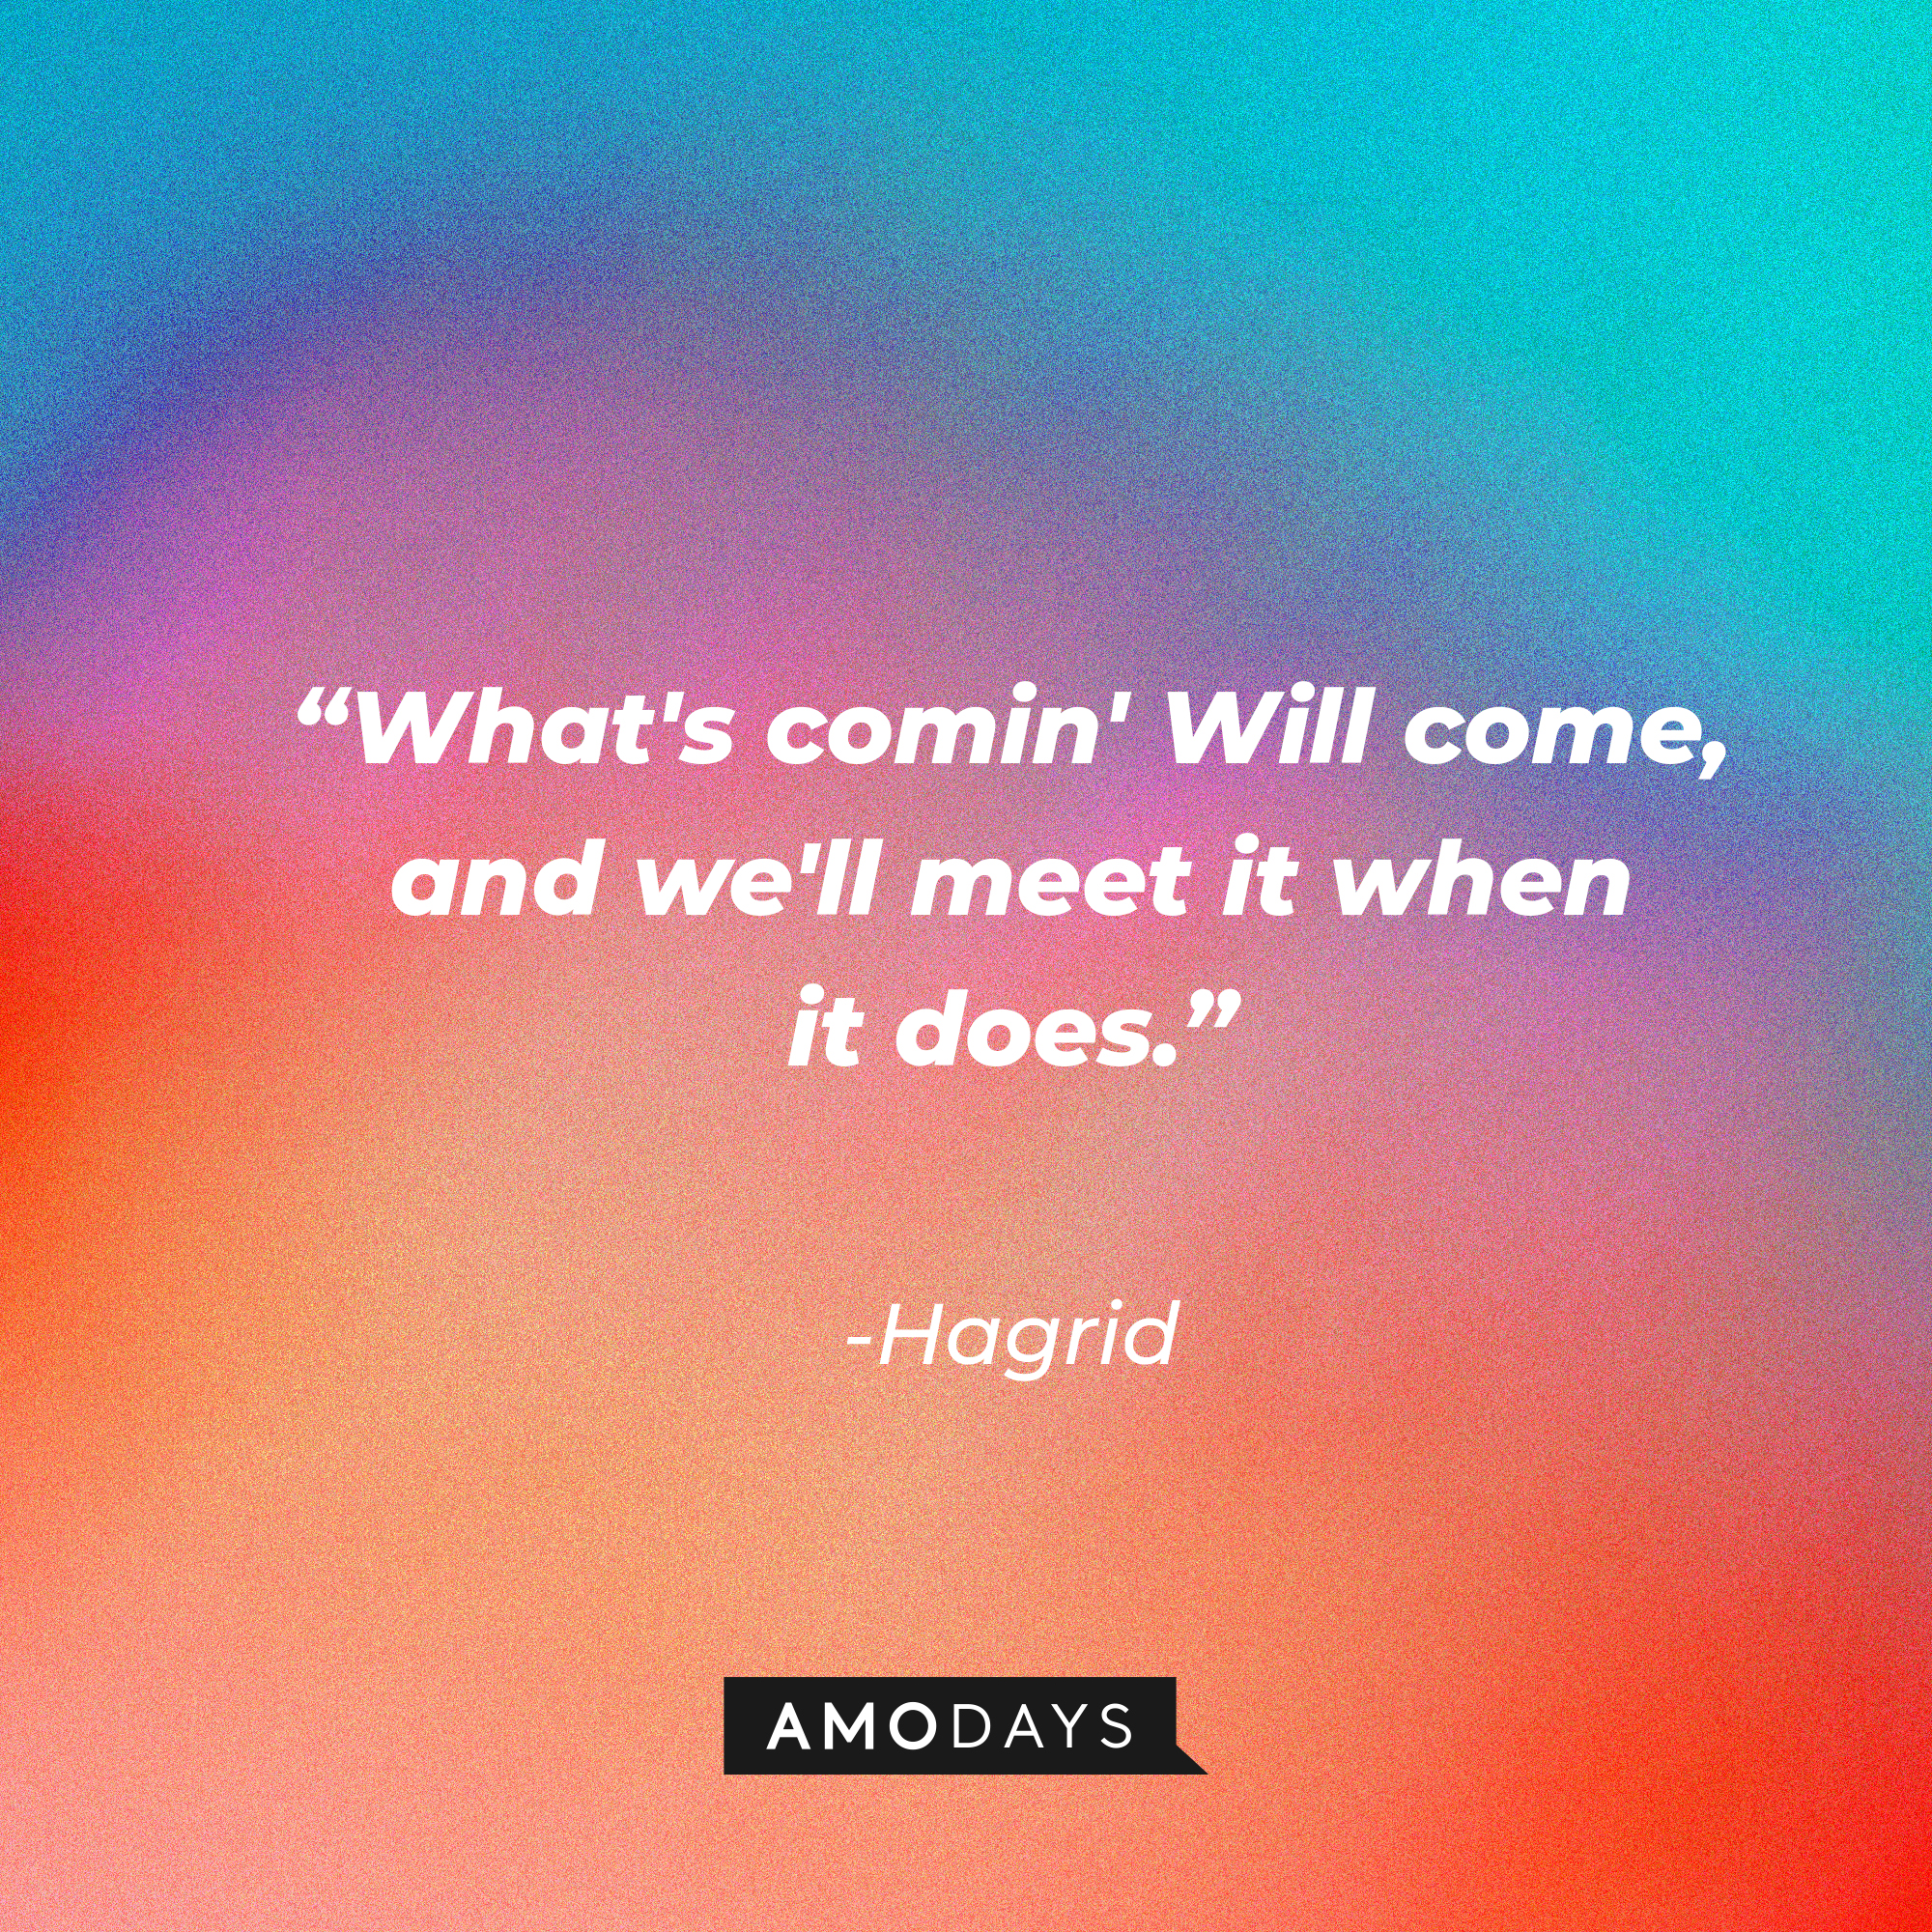 Hagrid's quote: "What's comin' Will come, and we'll meet it when it does." | Source: AmoDays